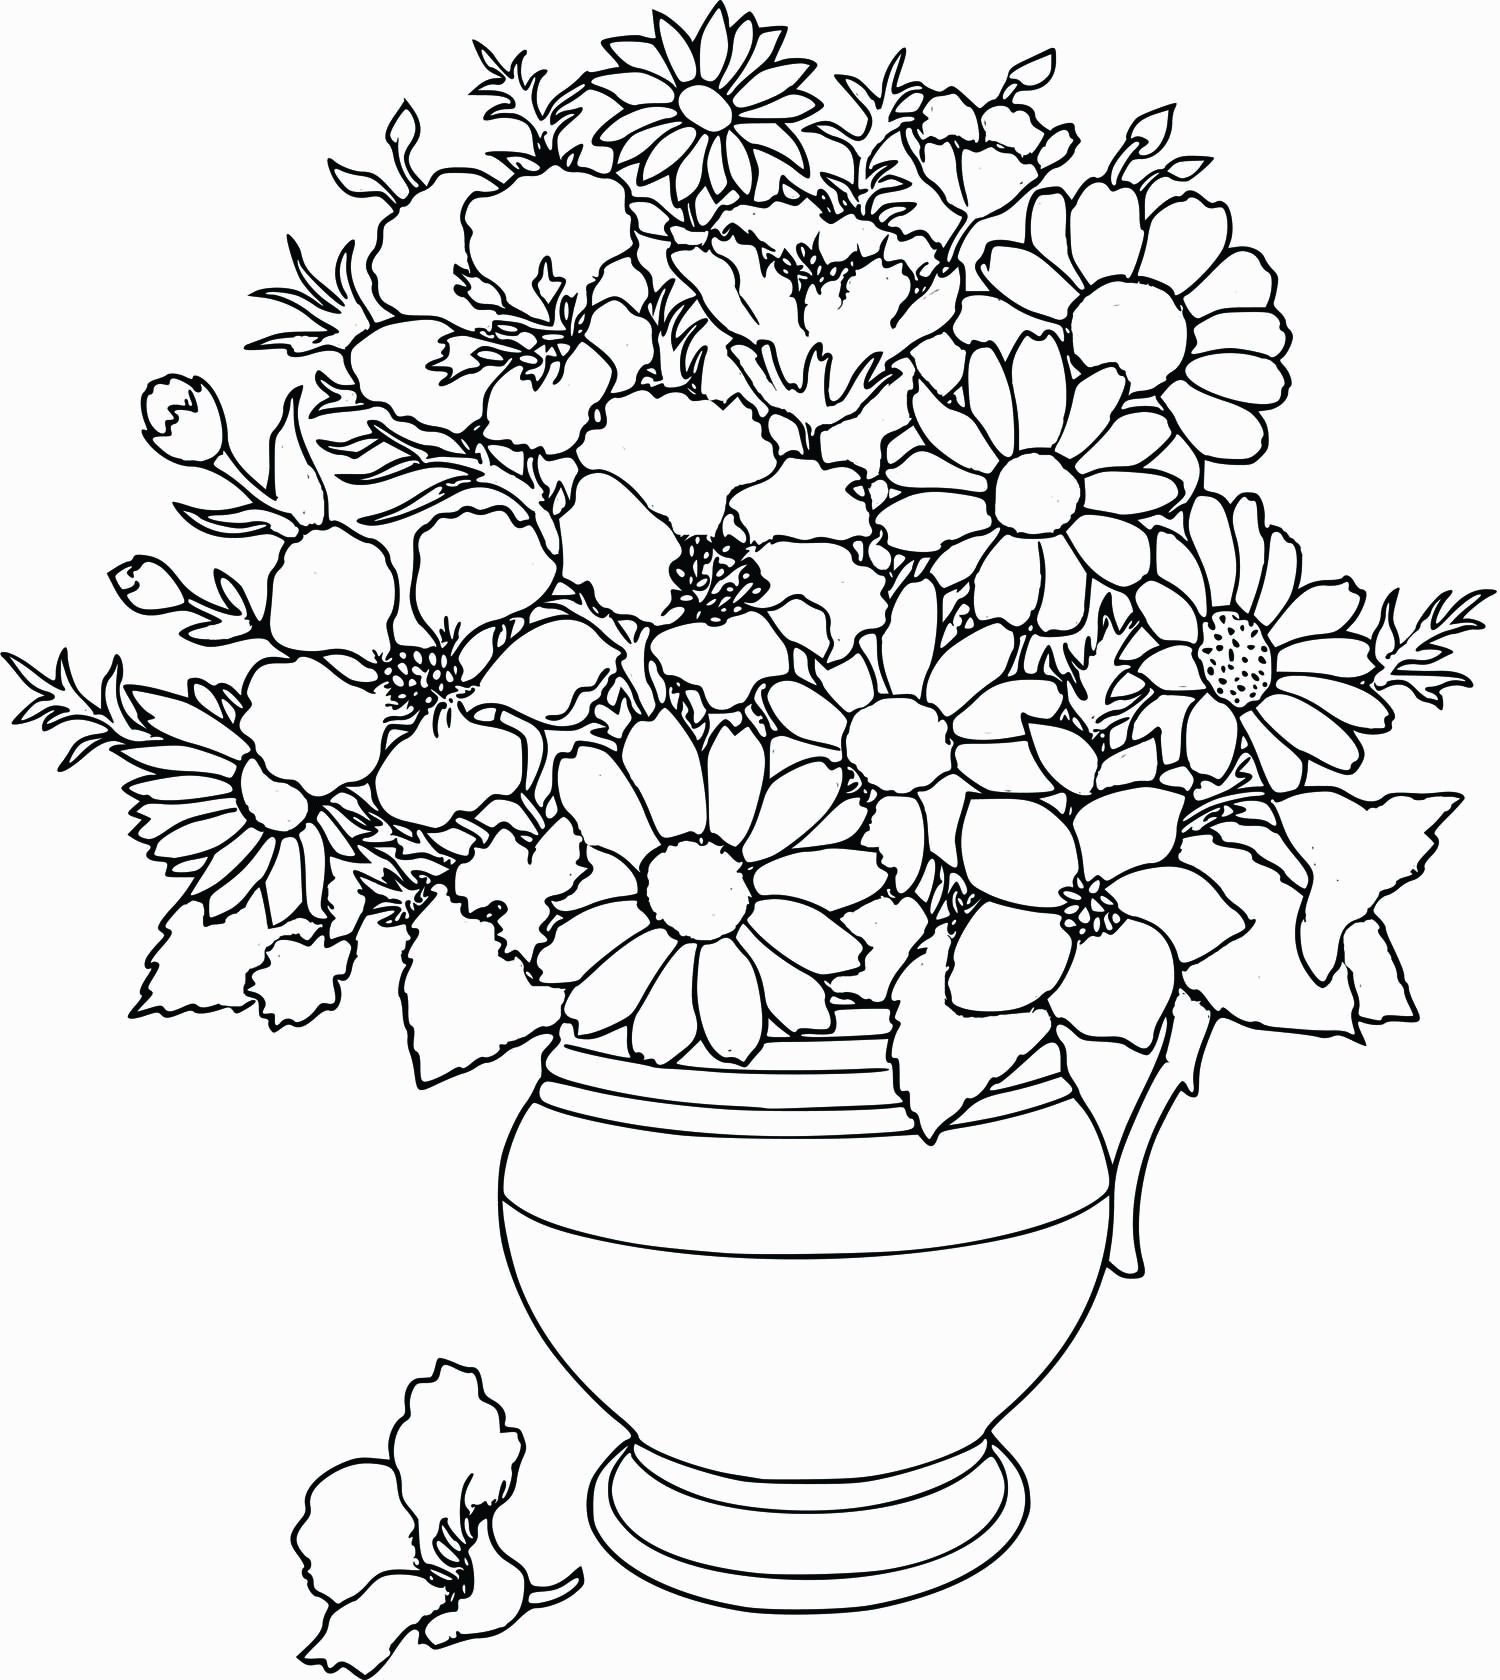 635 Cute Carnation Coloring Page with Animal character